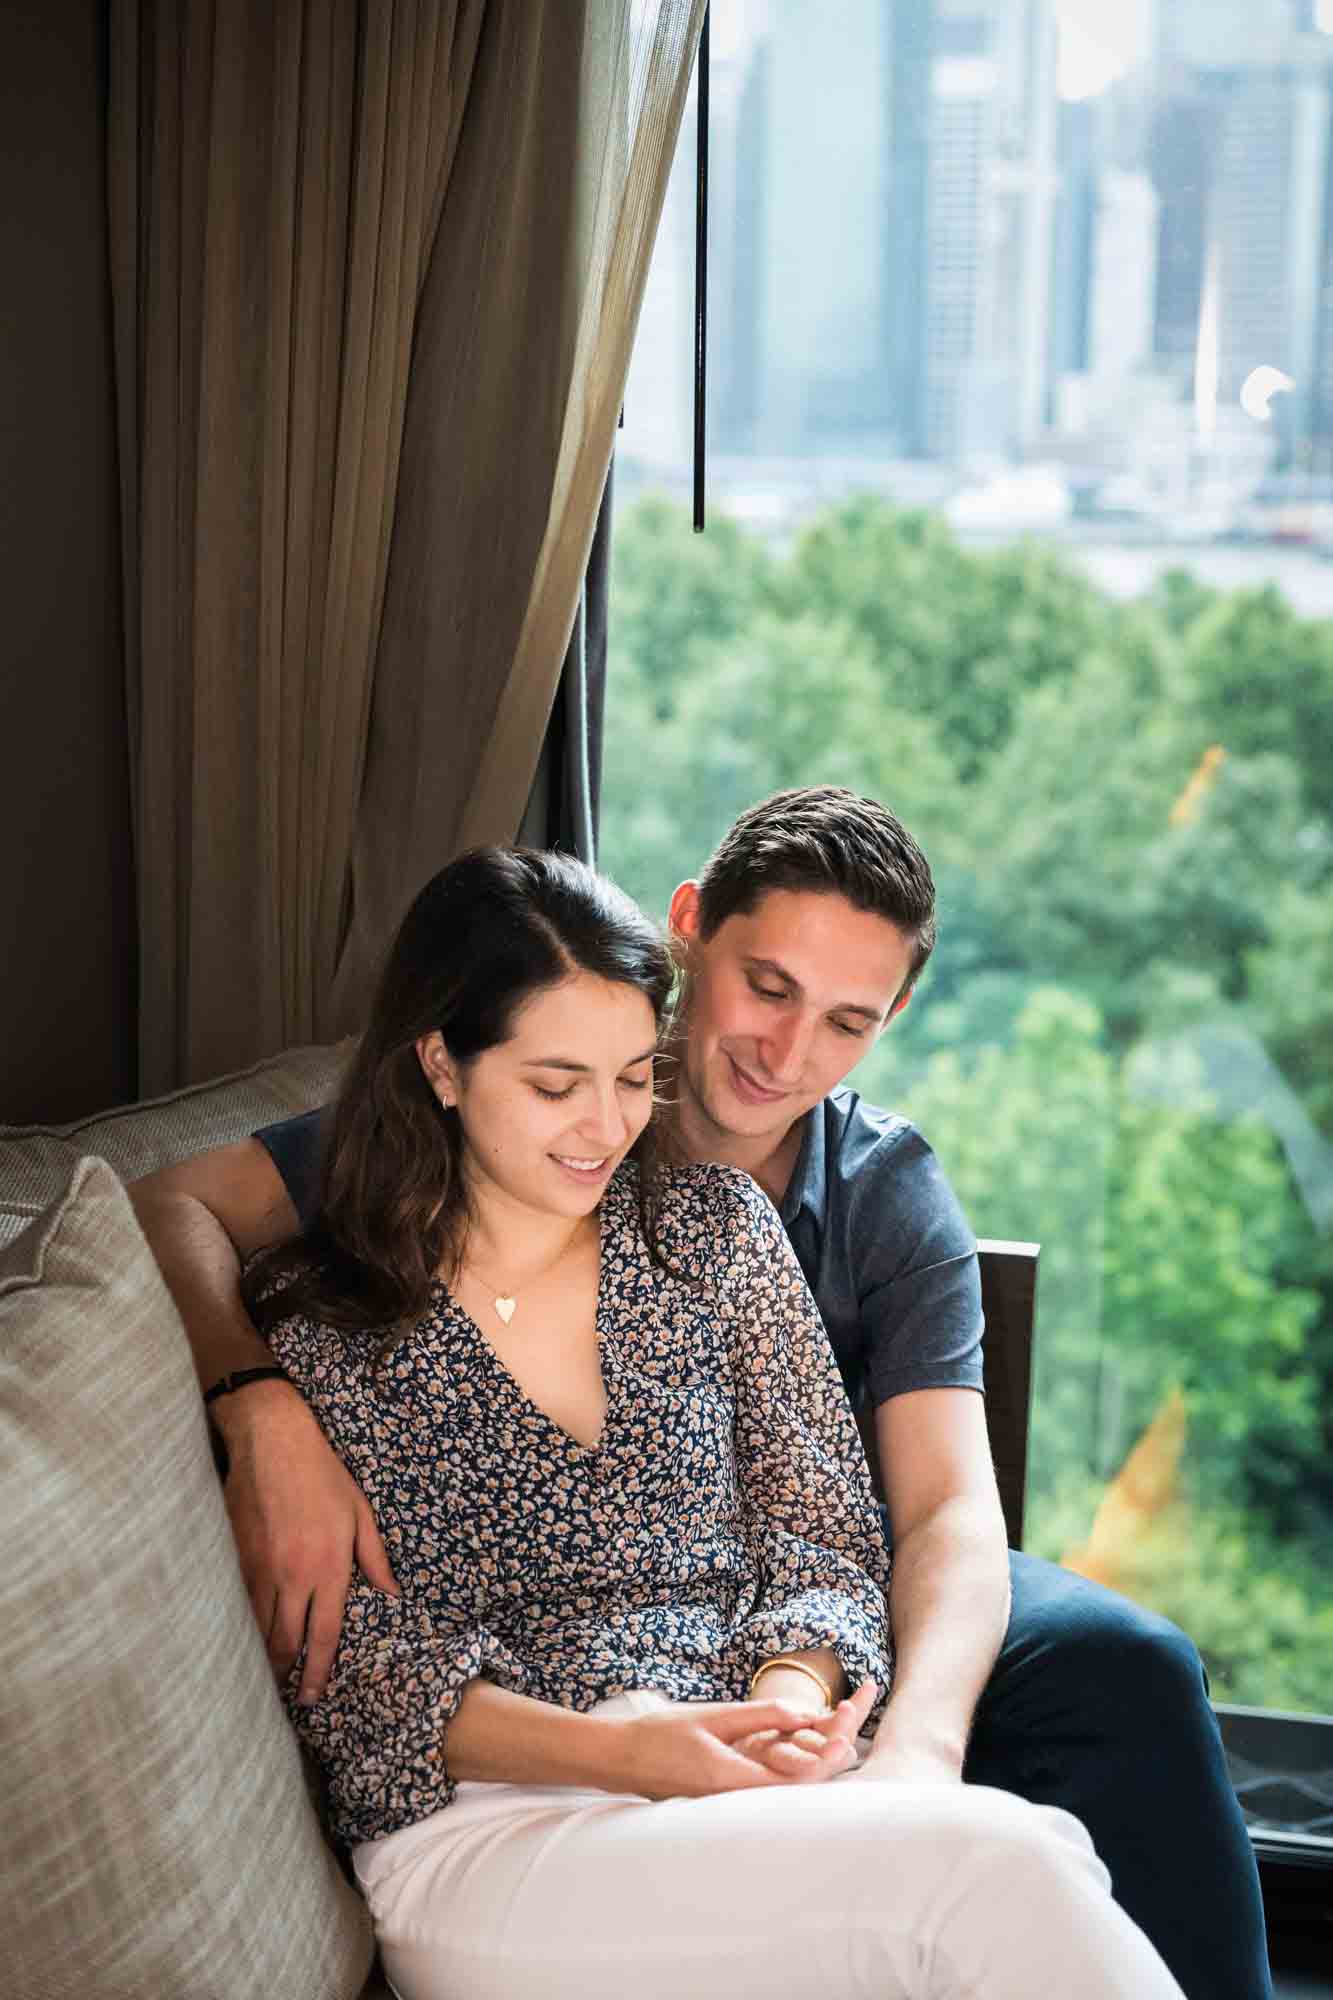 Couple sitting together on couch looking at engagement ring on woman's hand in front of large window at 1 Brooklyn Bridge Hotel